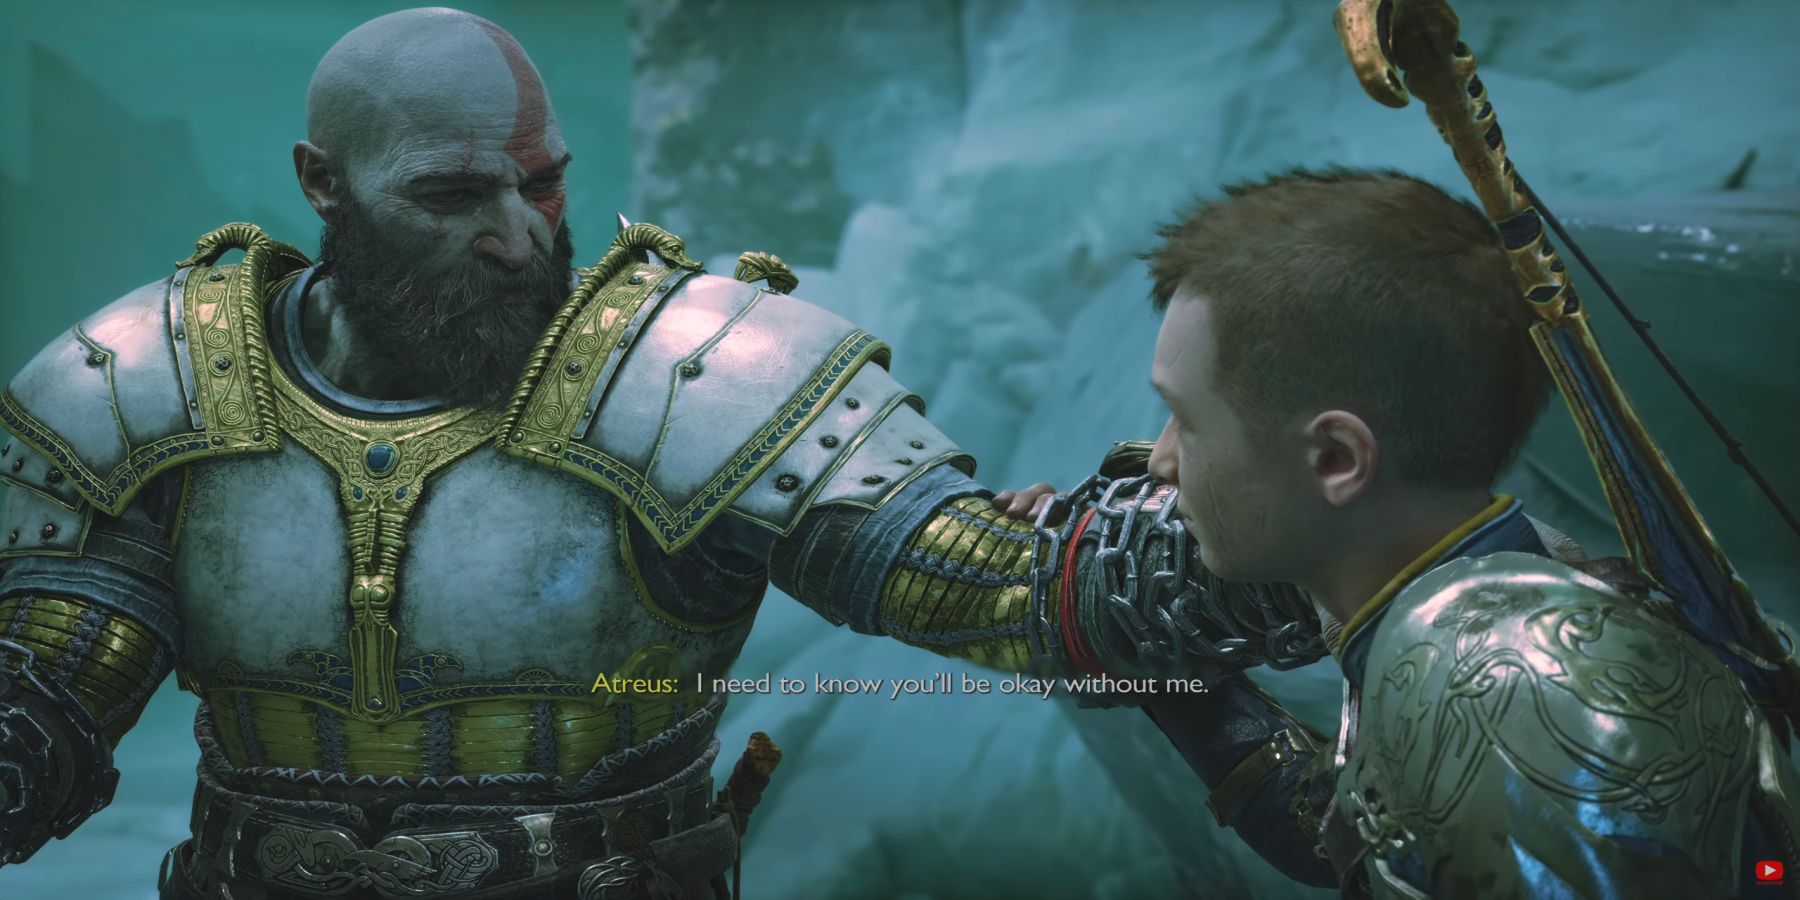 Kratos and Atreus Promise each other